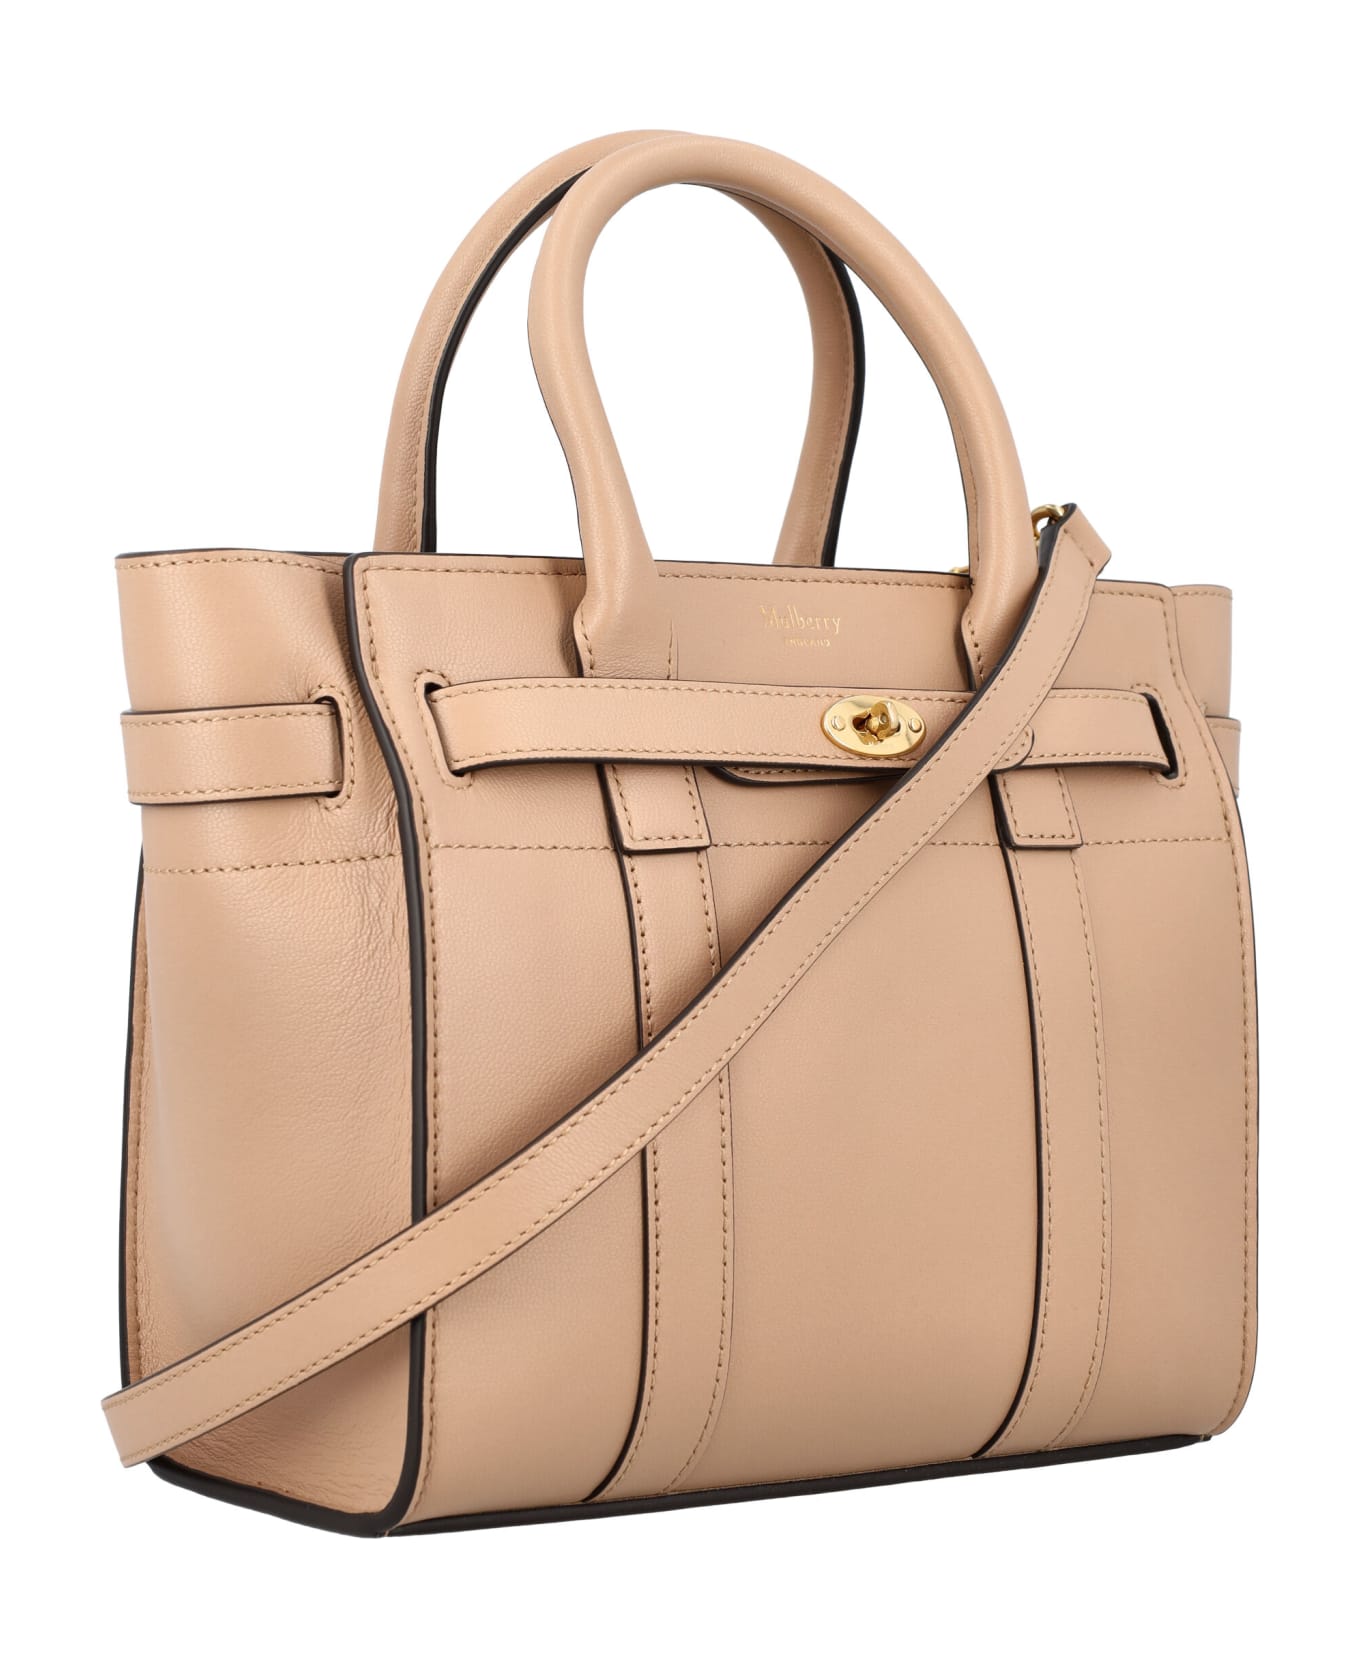 Mulberry Mini Zipped Bayswater Bag - MAPLE